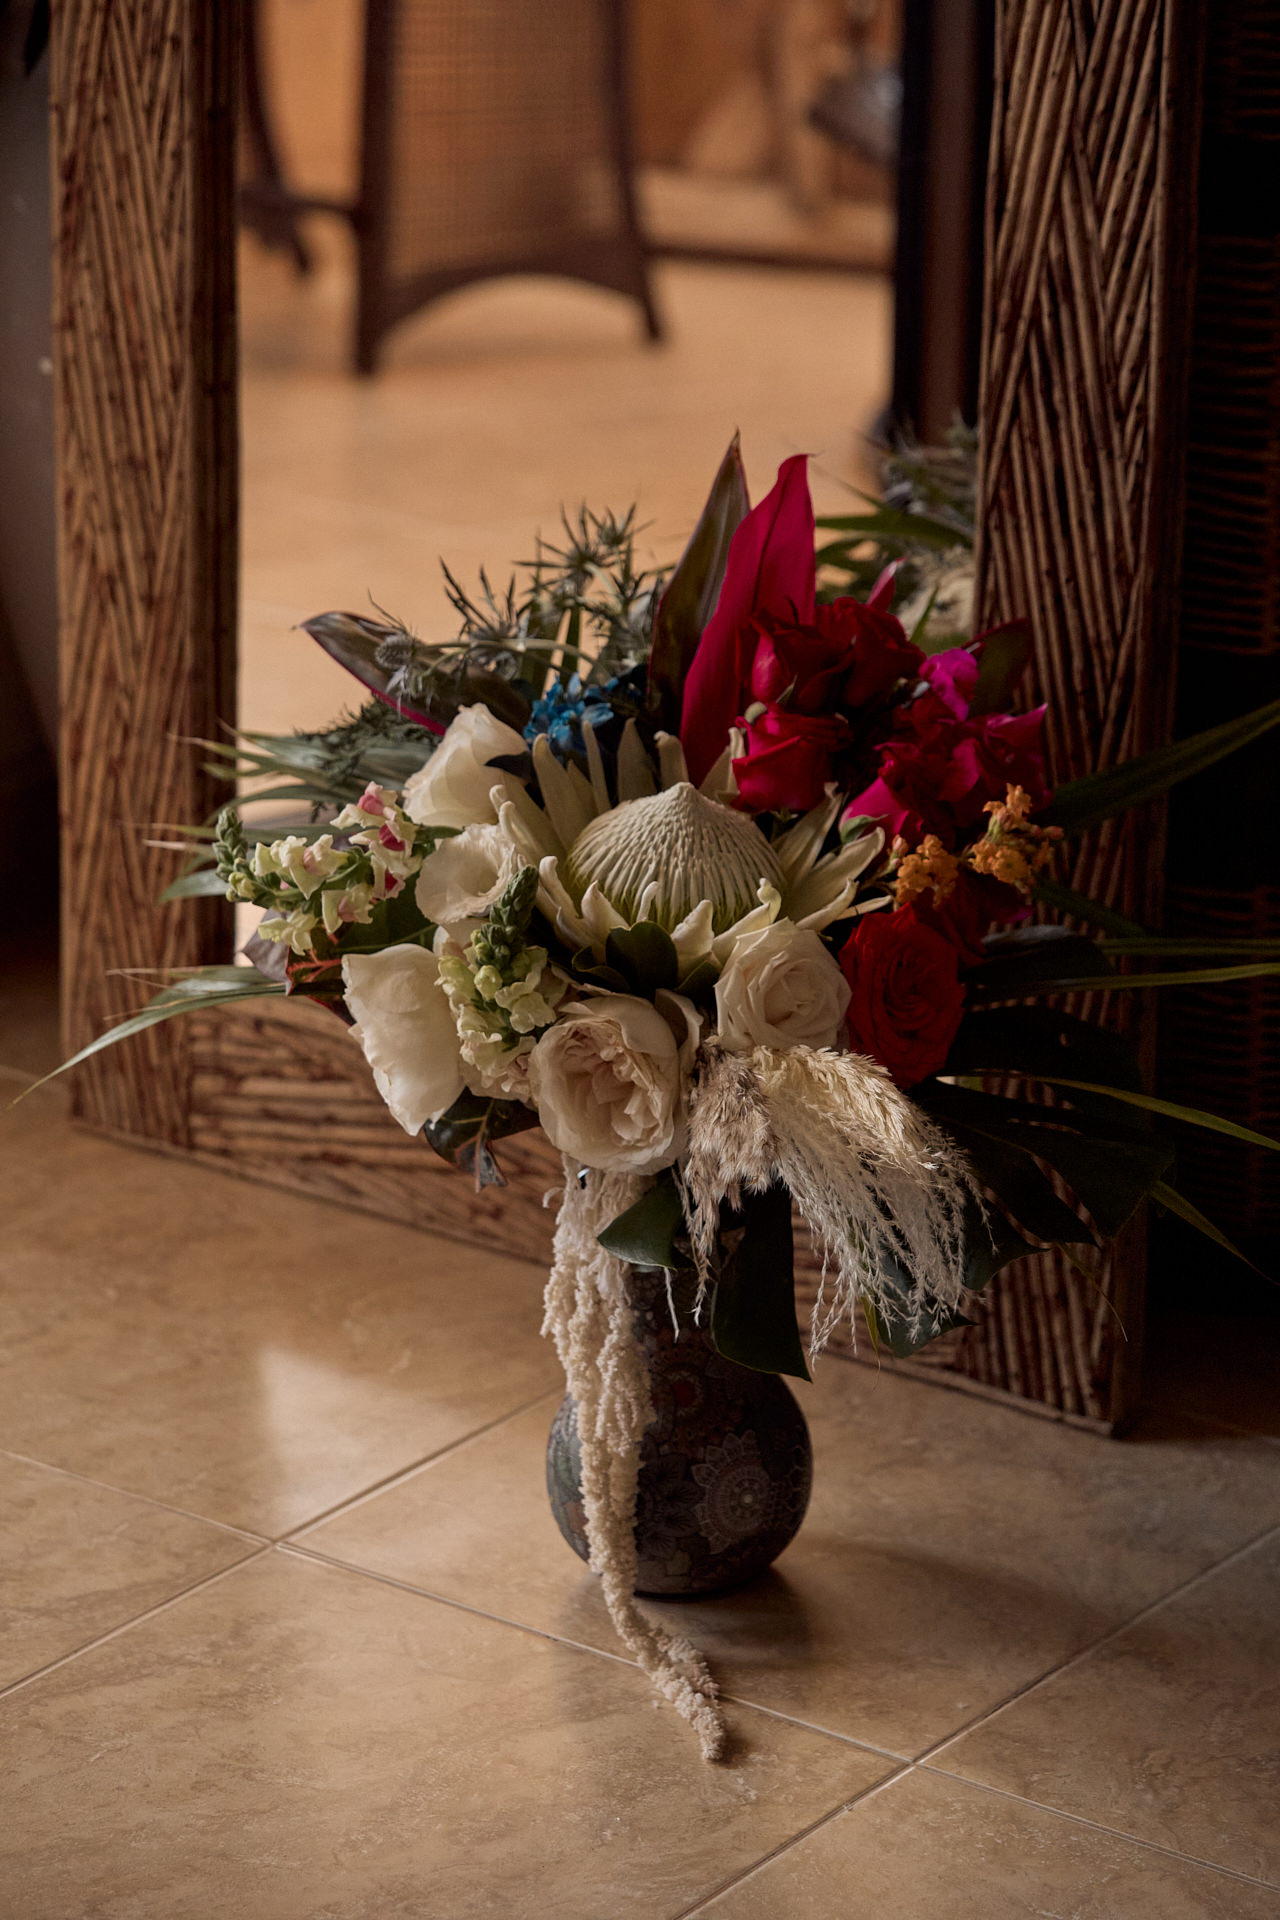 a vase filled with flowers sitting on top of a tiled floor.